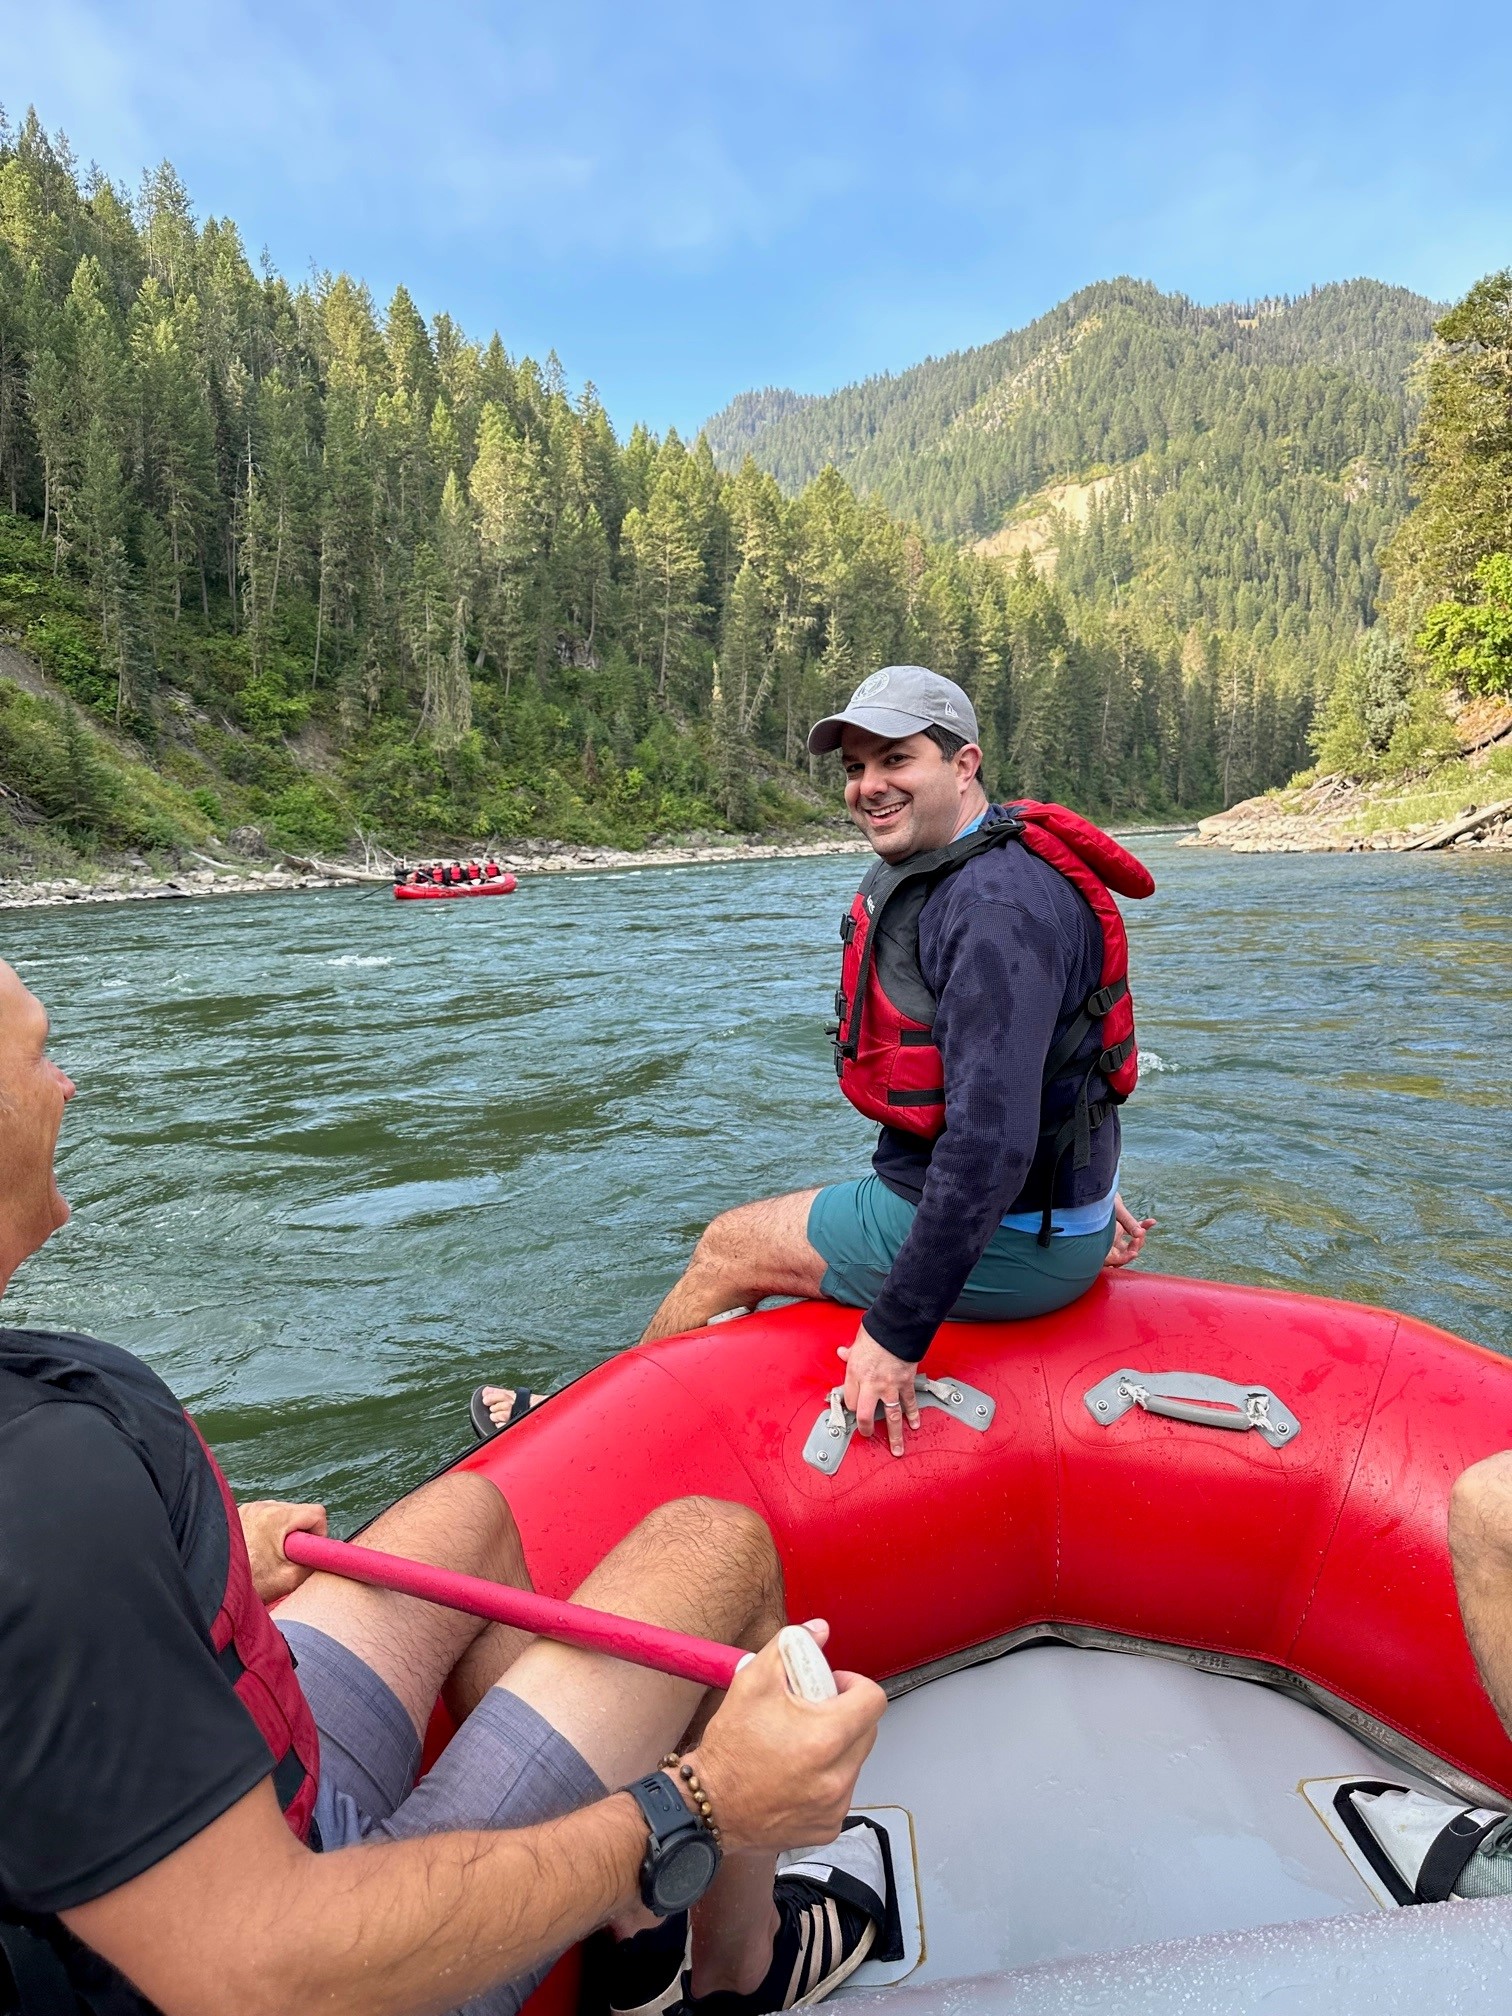 Man sits on the river rafting boat, navigating through scenic views of a mountain with tall trees.